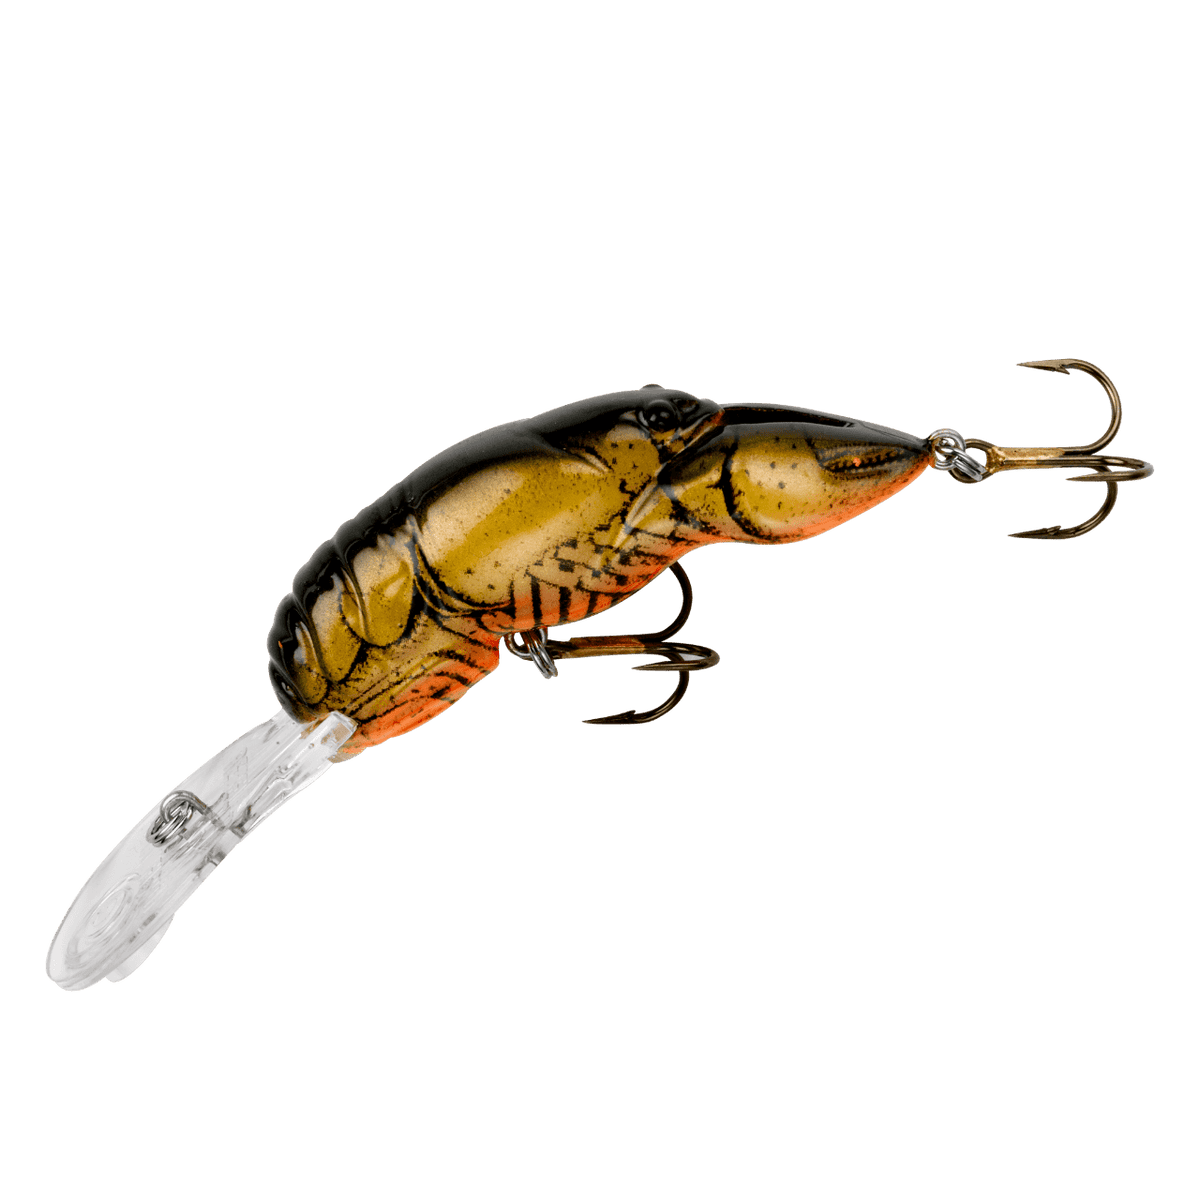 Shop Rebel Canada Fishing Lures, Minnows & Crawfishes